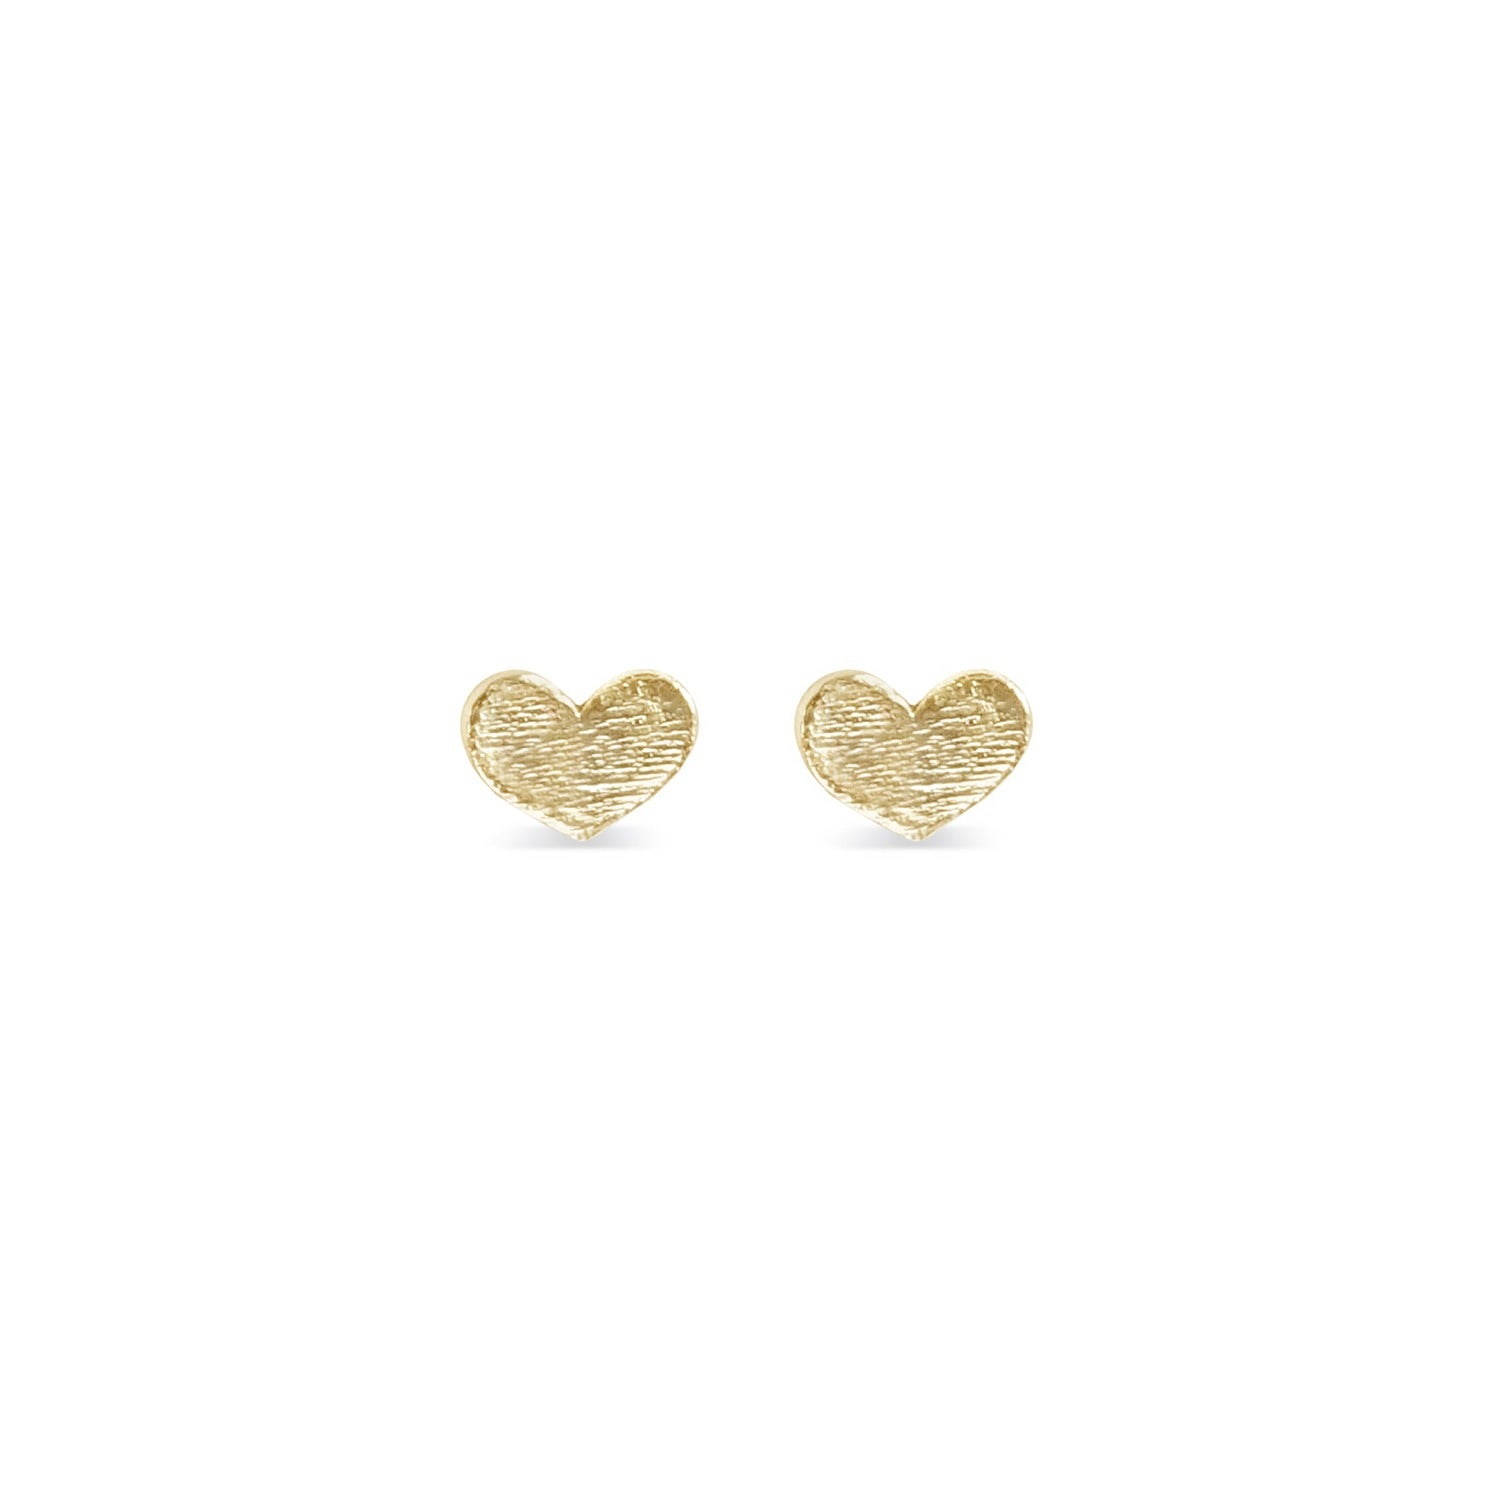 Tiny heart post earrings in 14K gold with texture